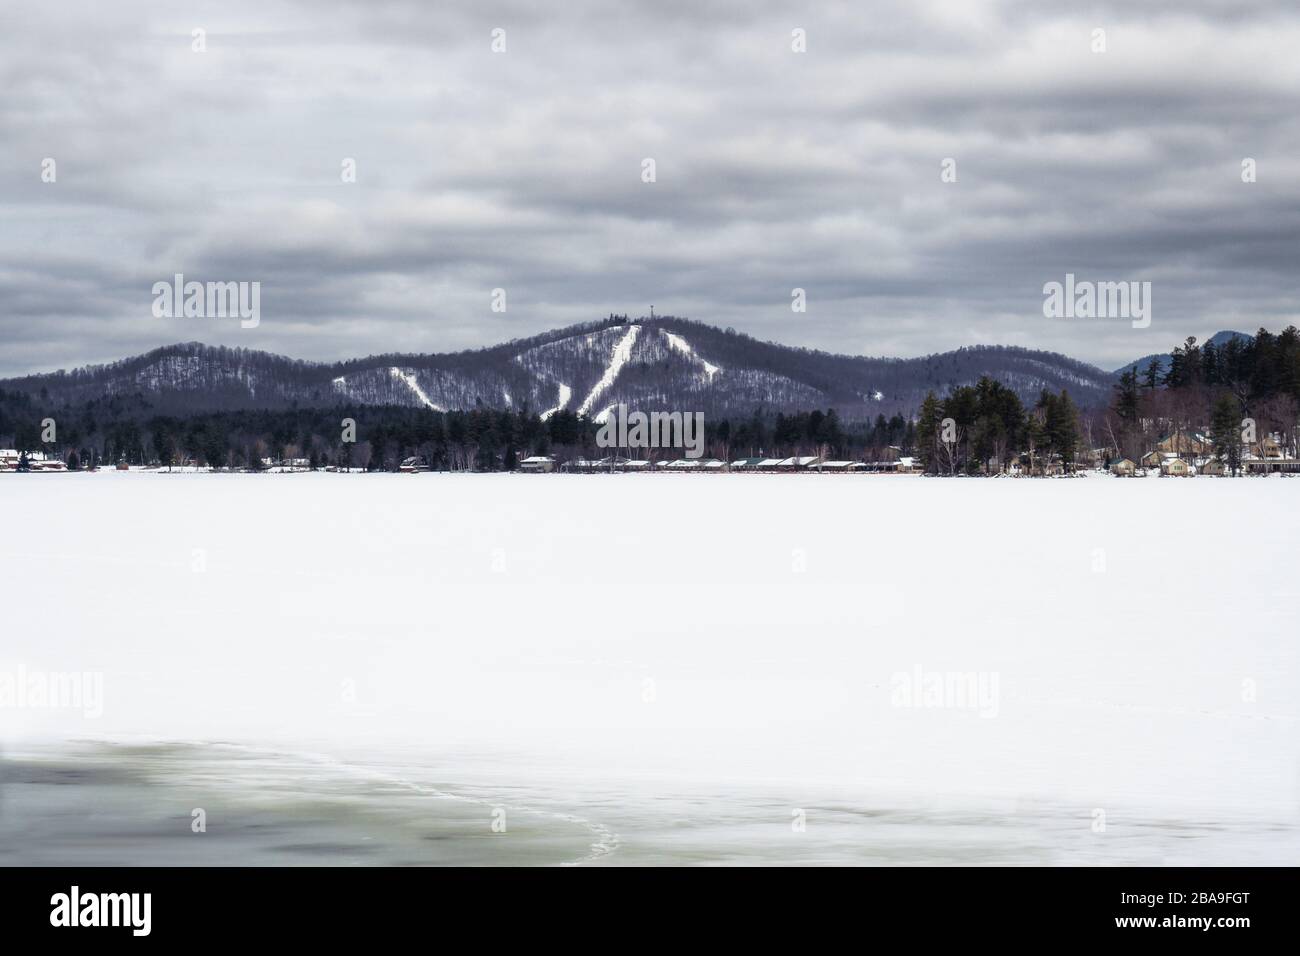 Quiet mountain landscape and frozen lake in The Adirondack Mountains of upstate New York Stock Photo